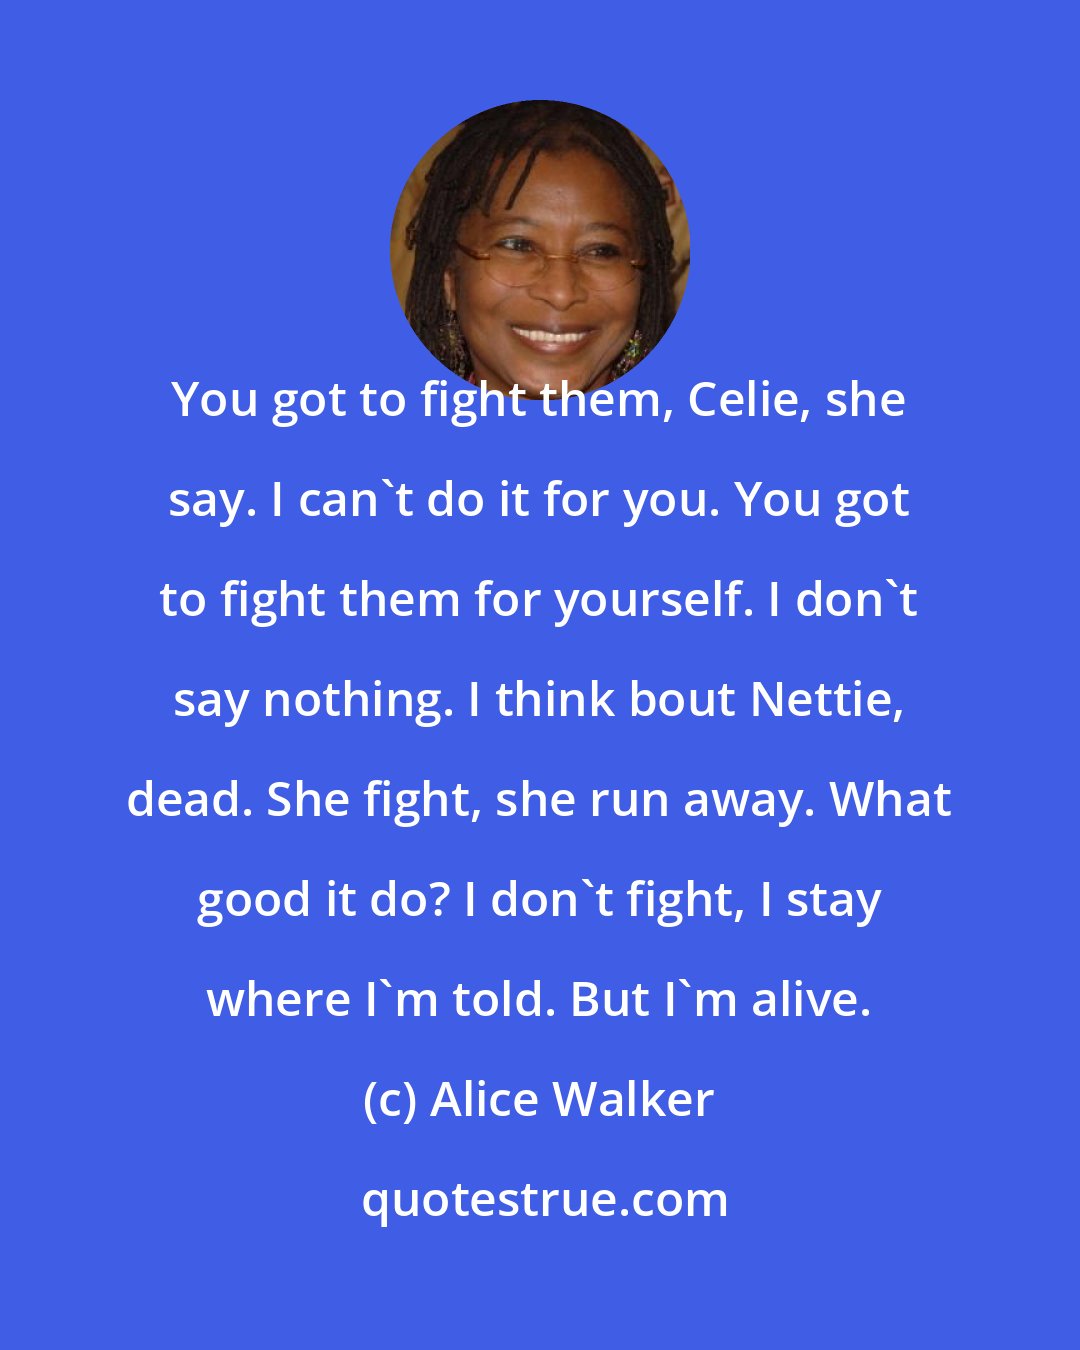 Alice Walker: You got to fight them, Celie, she say. I can't do it for you. You got to fight them for yourself. I don't say nothing. I think bout Nettie, dead. She fight, she run away. What good it do? I don't fight, I stay where I'm told. But I'm alive.